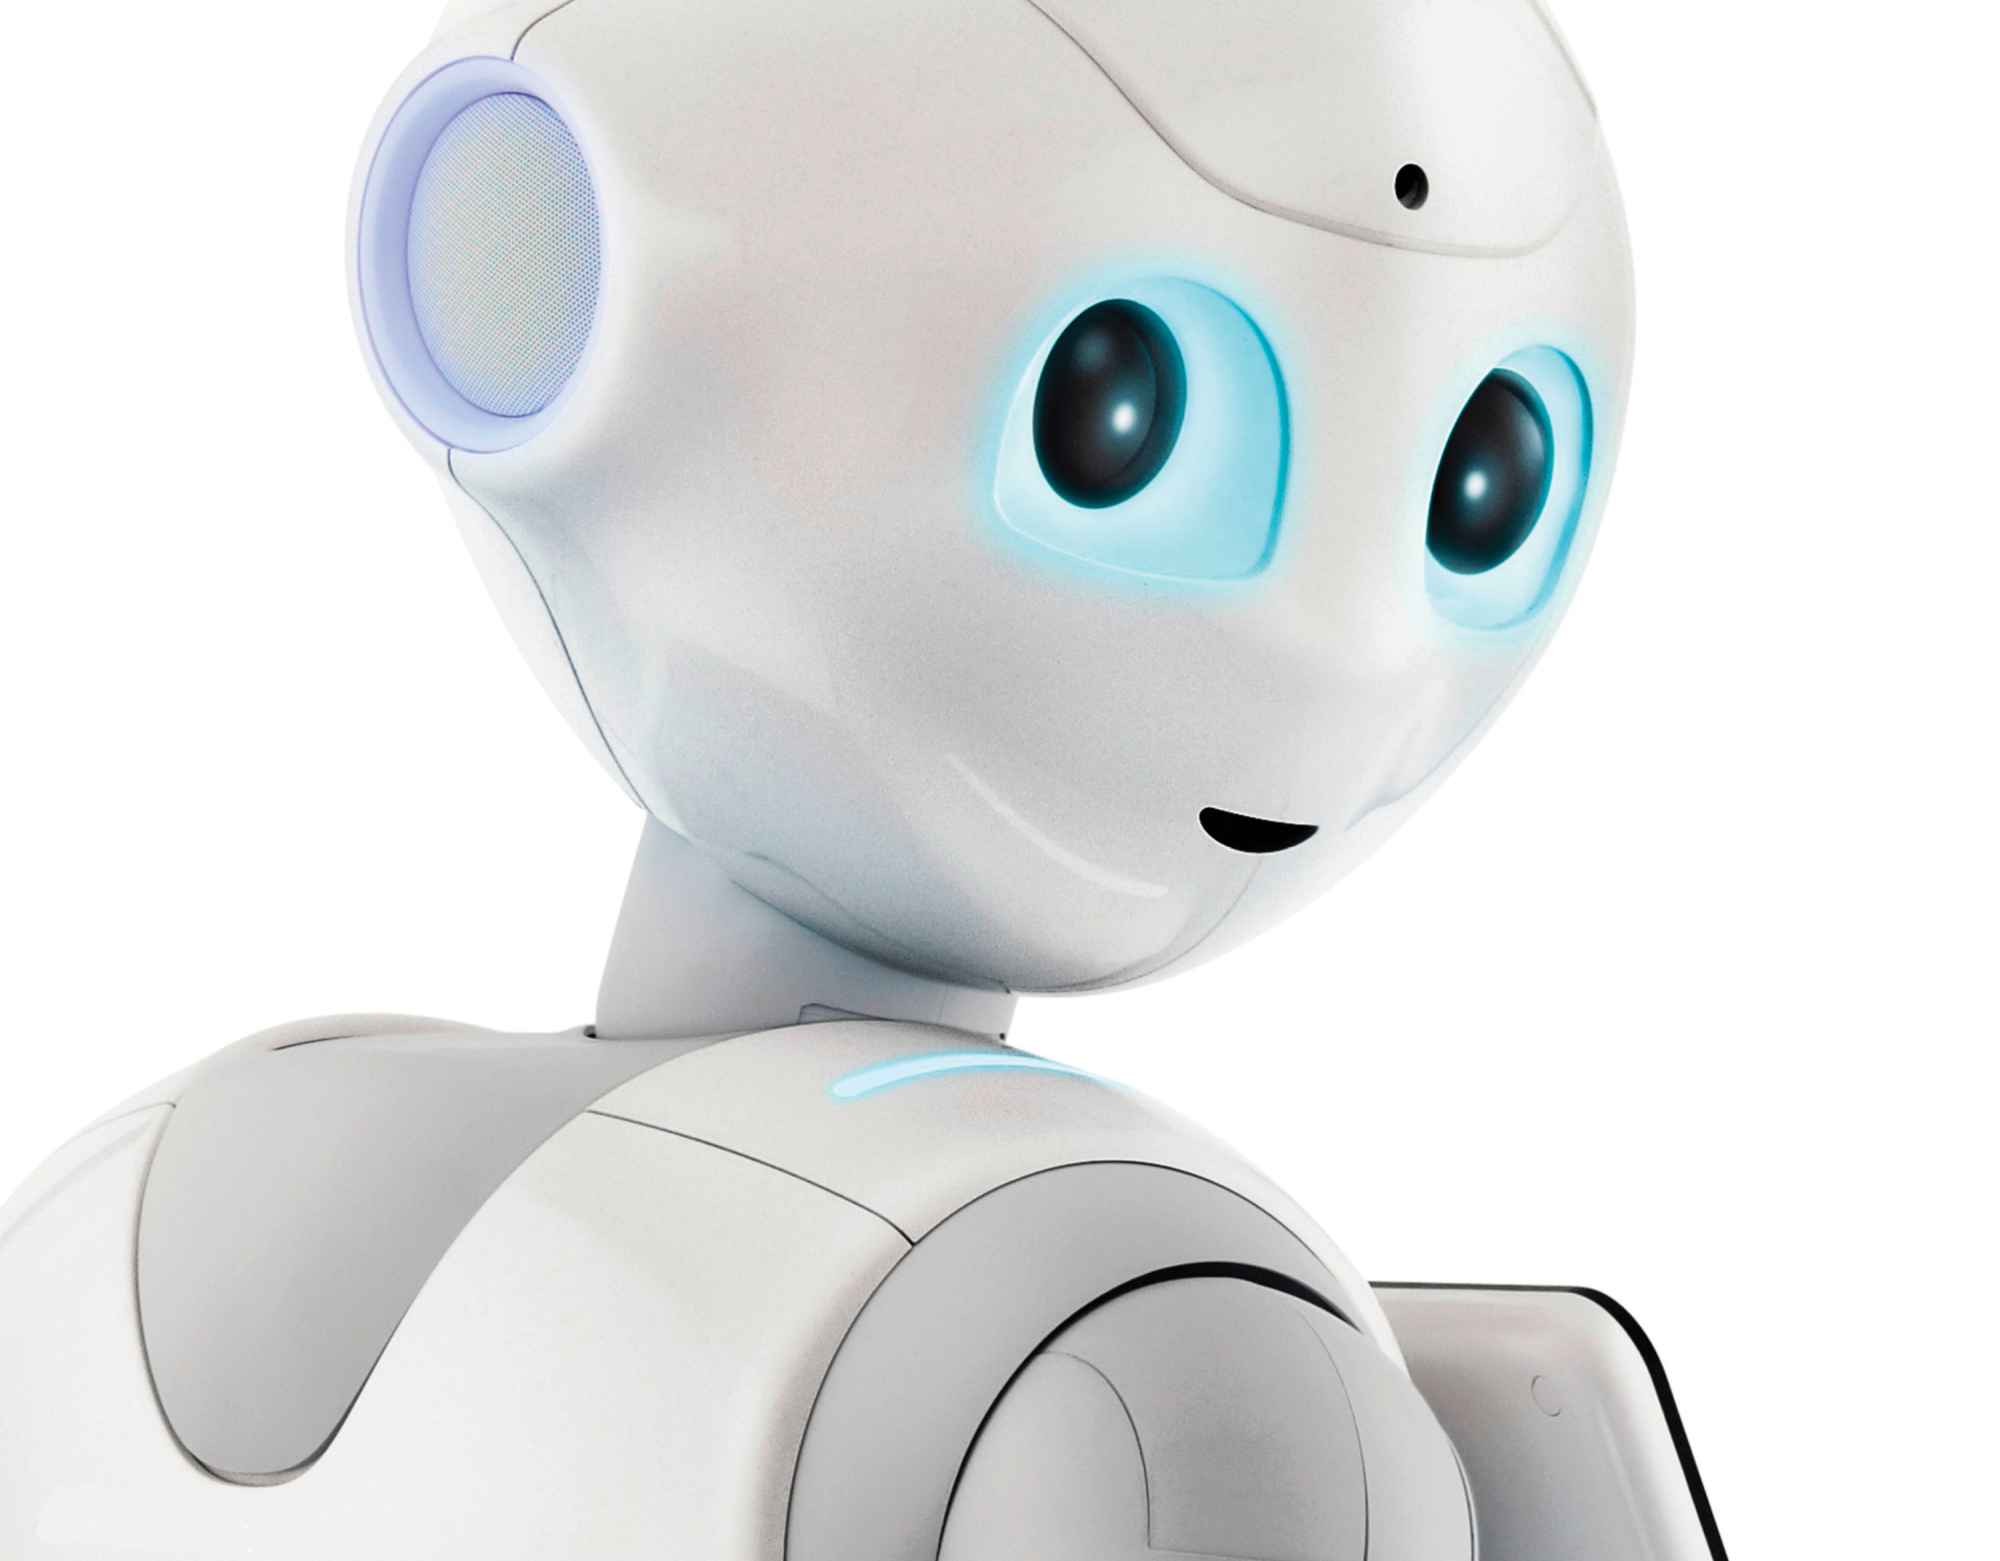 Alibaba and Foxconn to invest in SoftBank’s robotics business